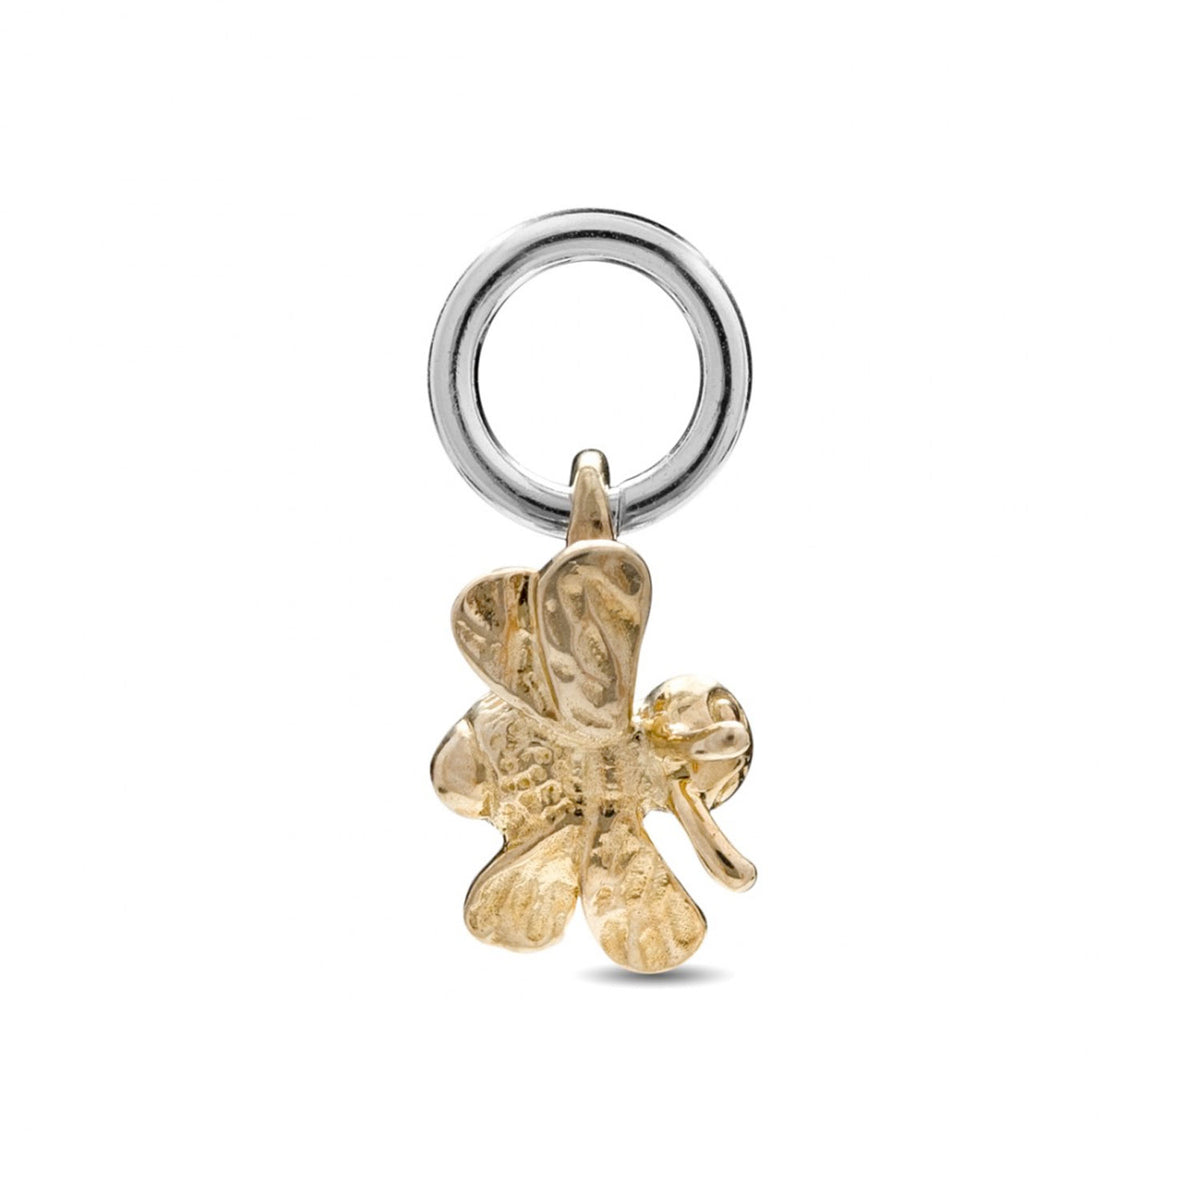 Tiny solid gold bumble bee charm scarlett jewellery